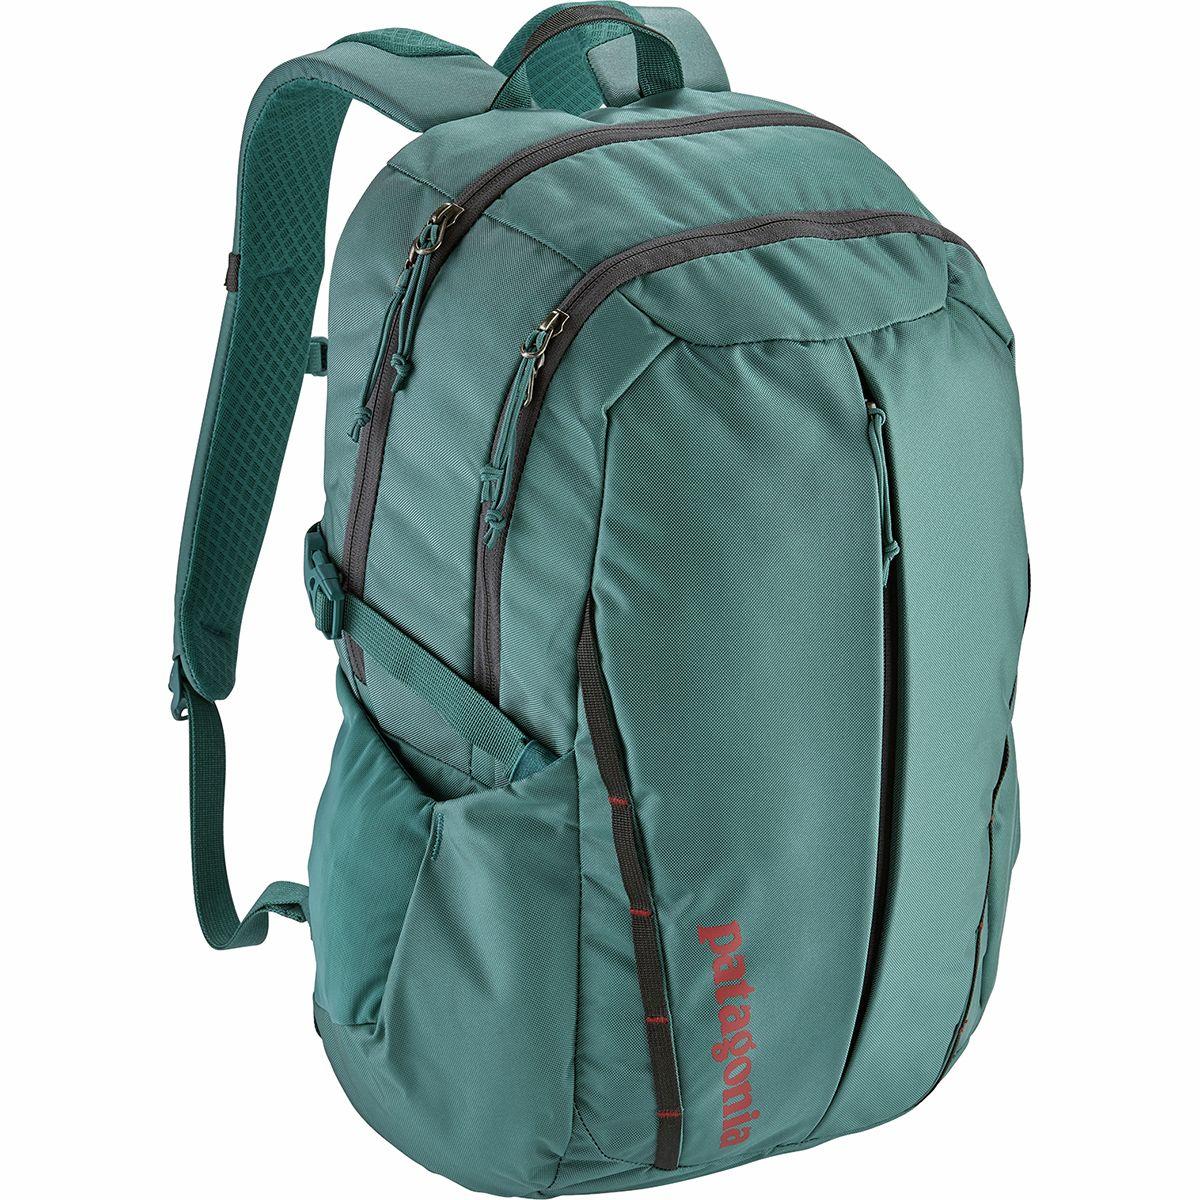 Patagonia Refugio 28l Backpack in Green for Men - Lyst